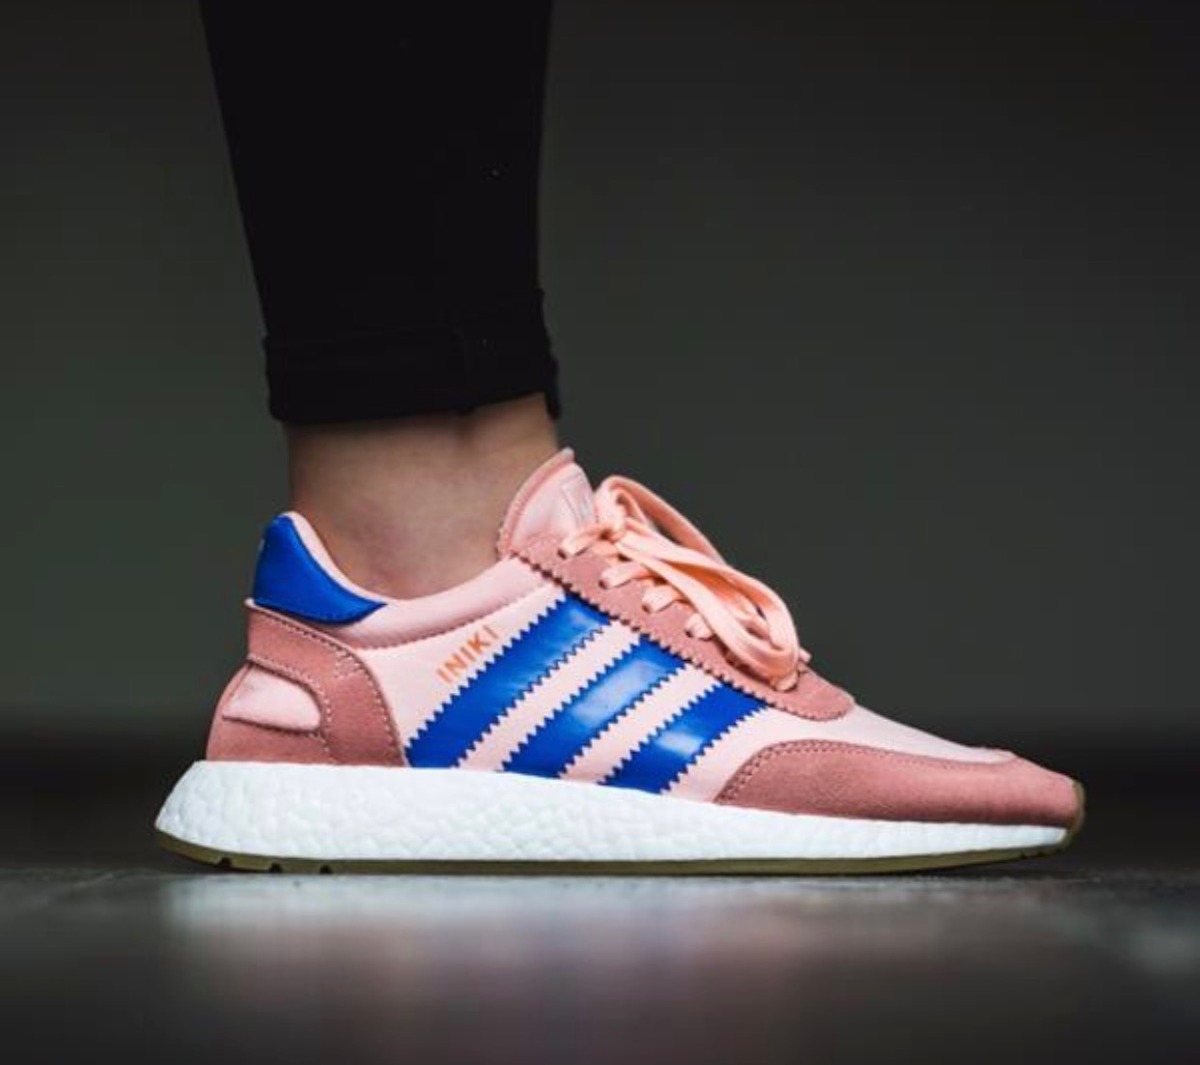 adidas iniki mujer multicolor Clothing and Fashion | Dresses ... صور اقلام